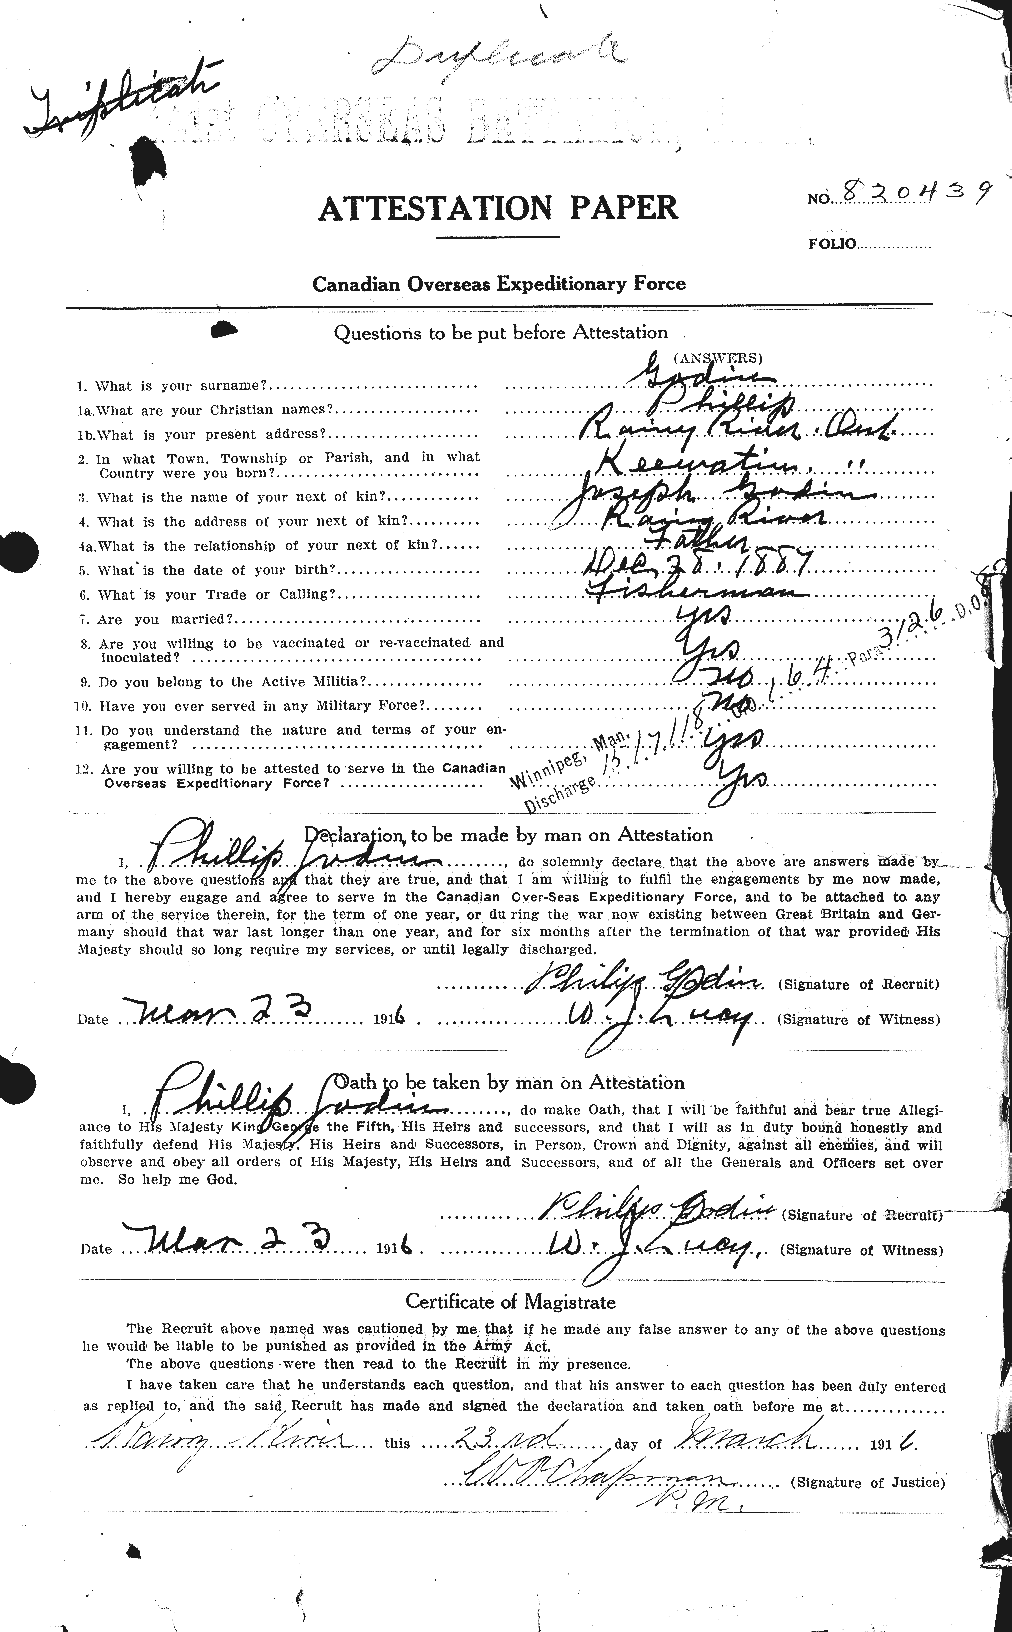 Personnel Records of the First World War - CEF 354567a